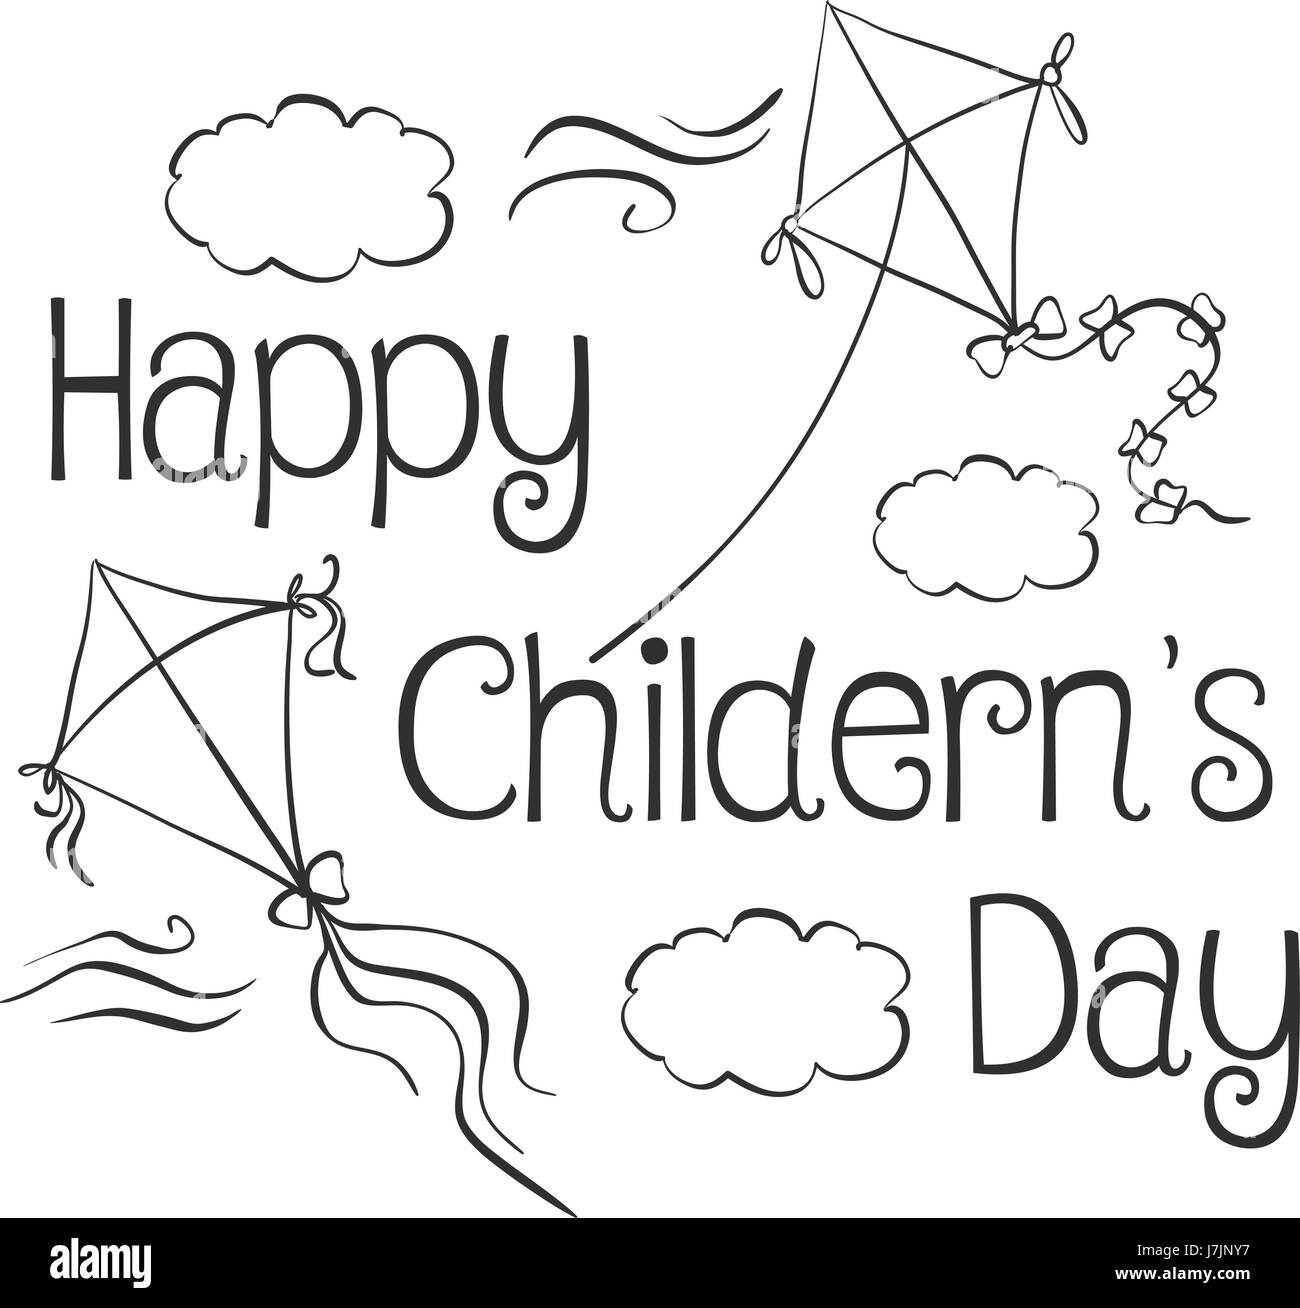 Happy children's day | Basic drawing, Drawing for kids, Happy children's day